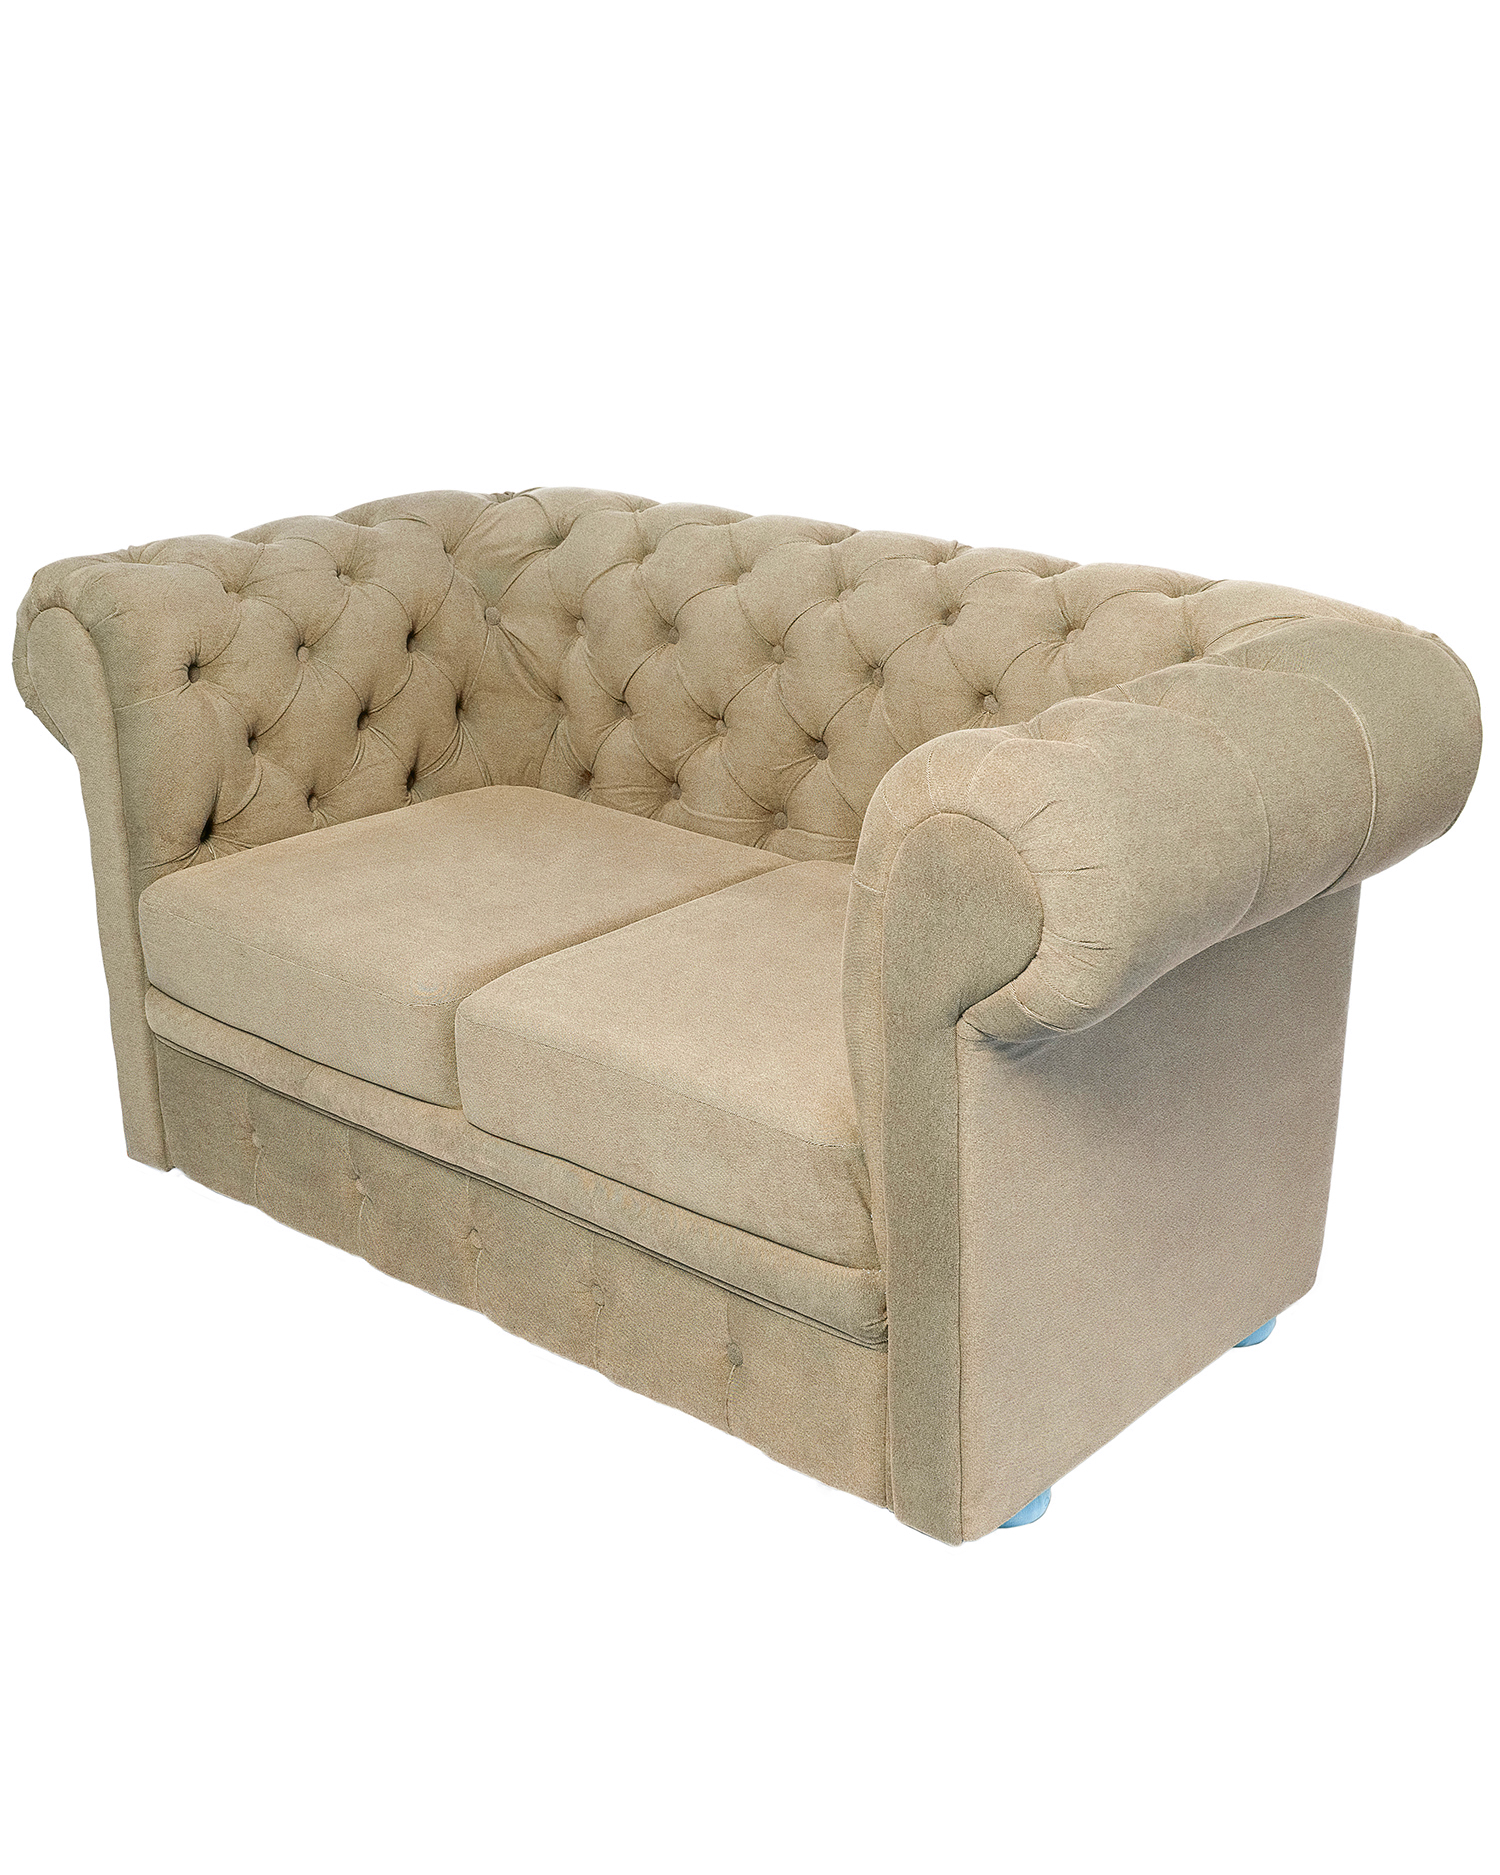 Demo product furniture vintage sofa beige discounted free shipping